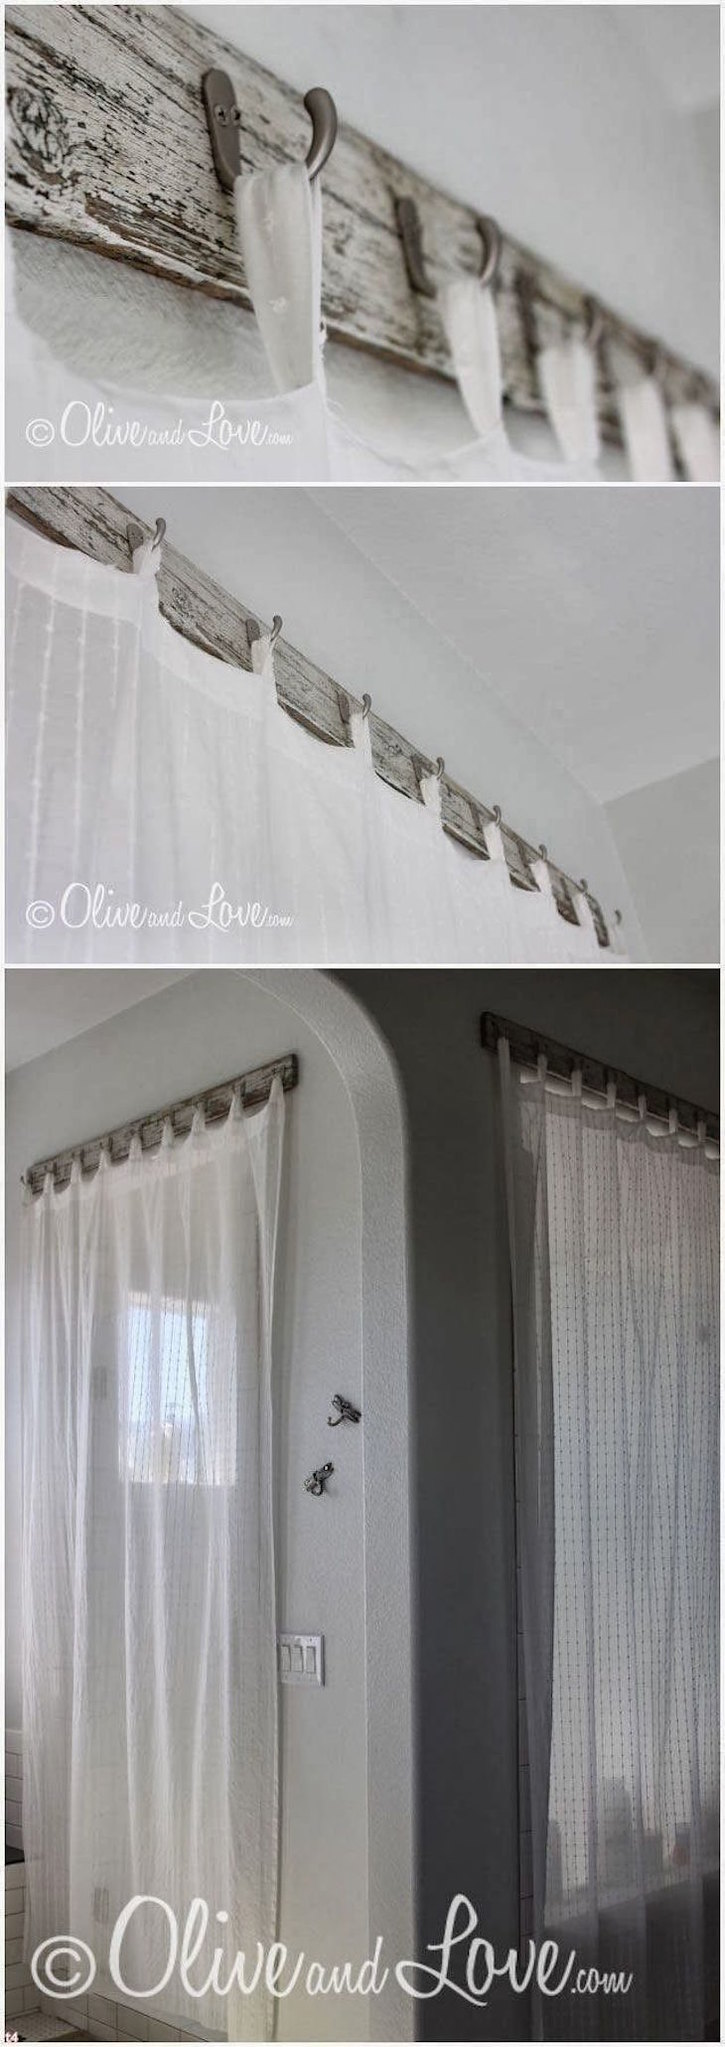 10 DIY Projects to Make Your Home Look Classy